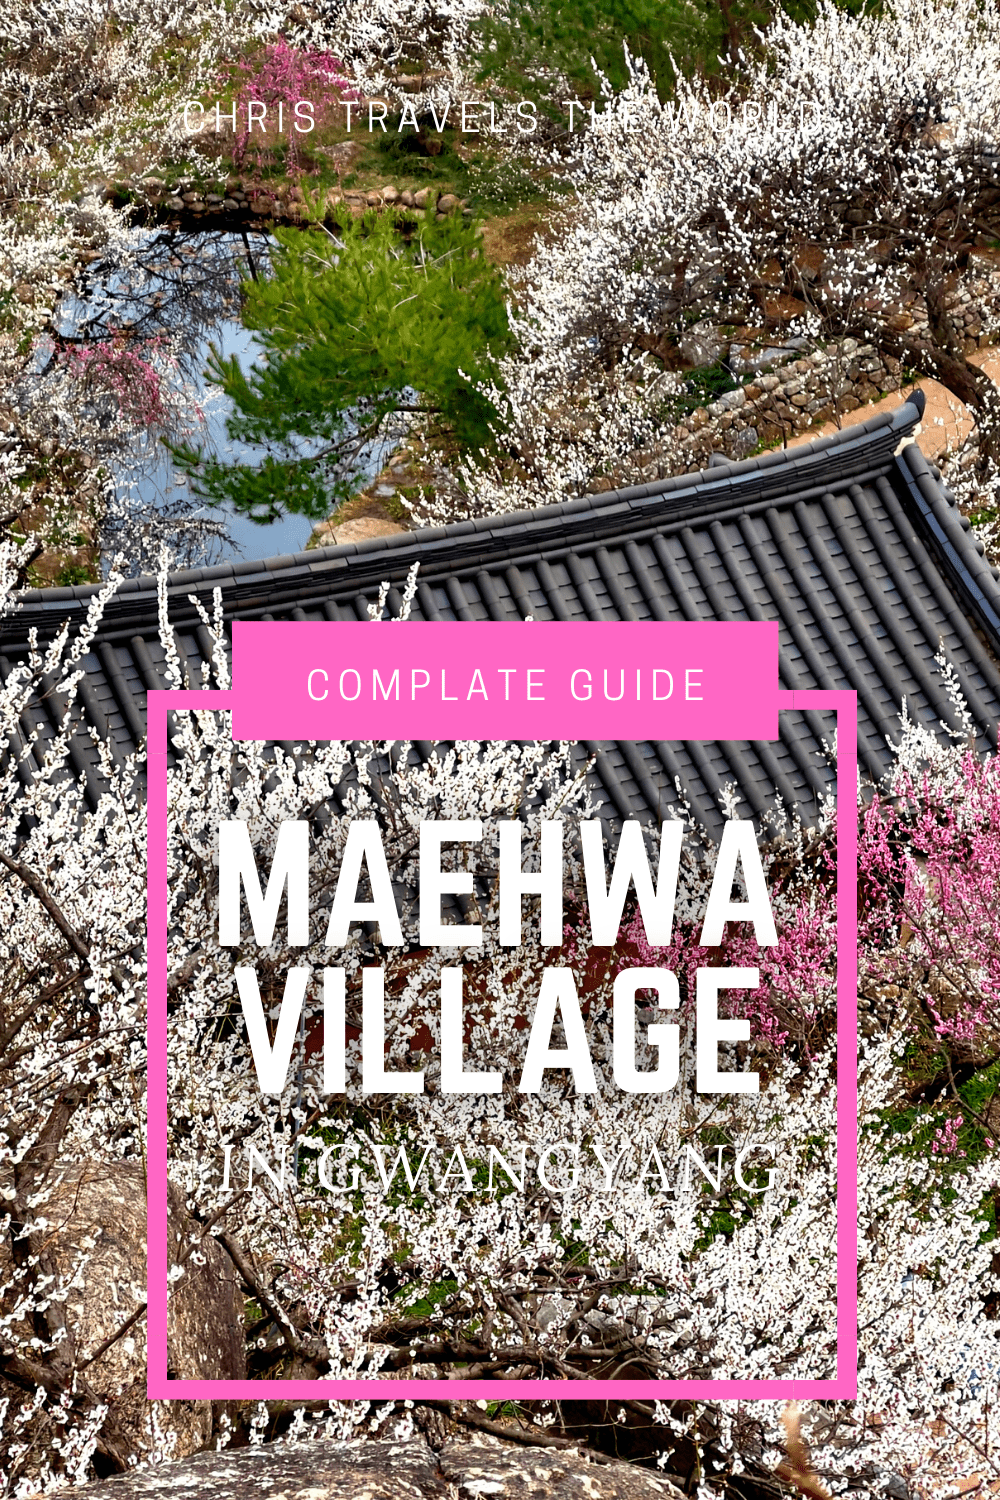 Complete Guide to Maehwa VIllage in Gwangyang - blum blossom